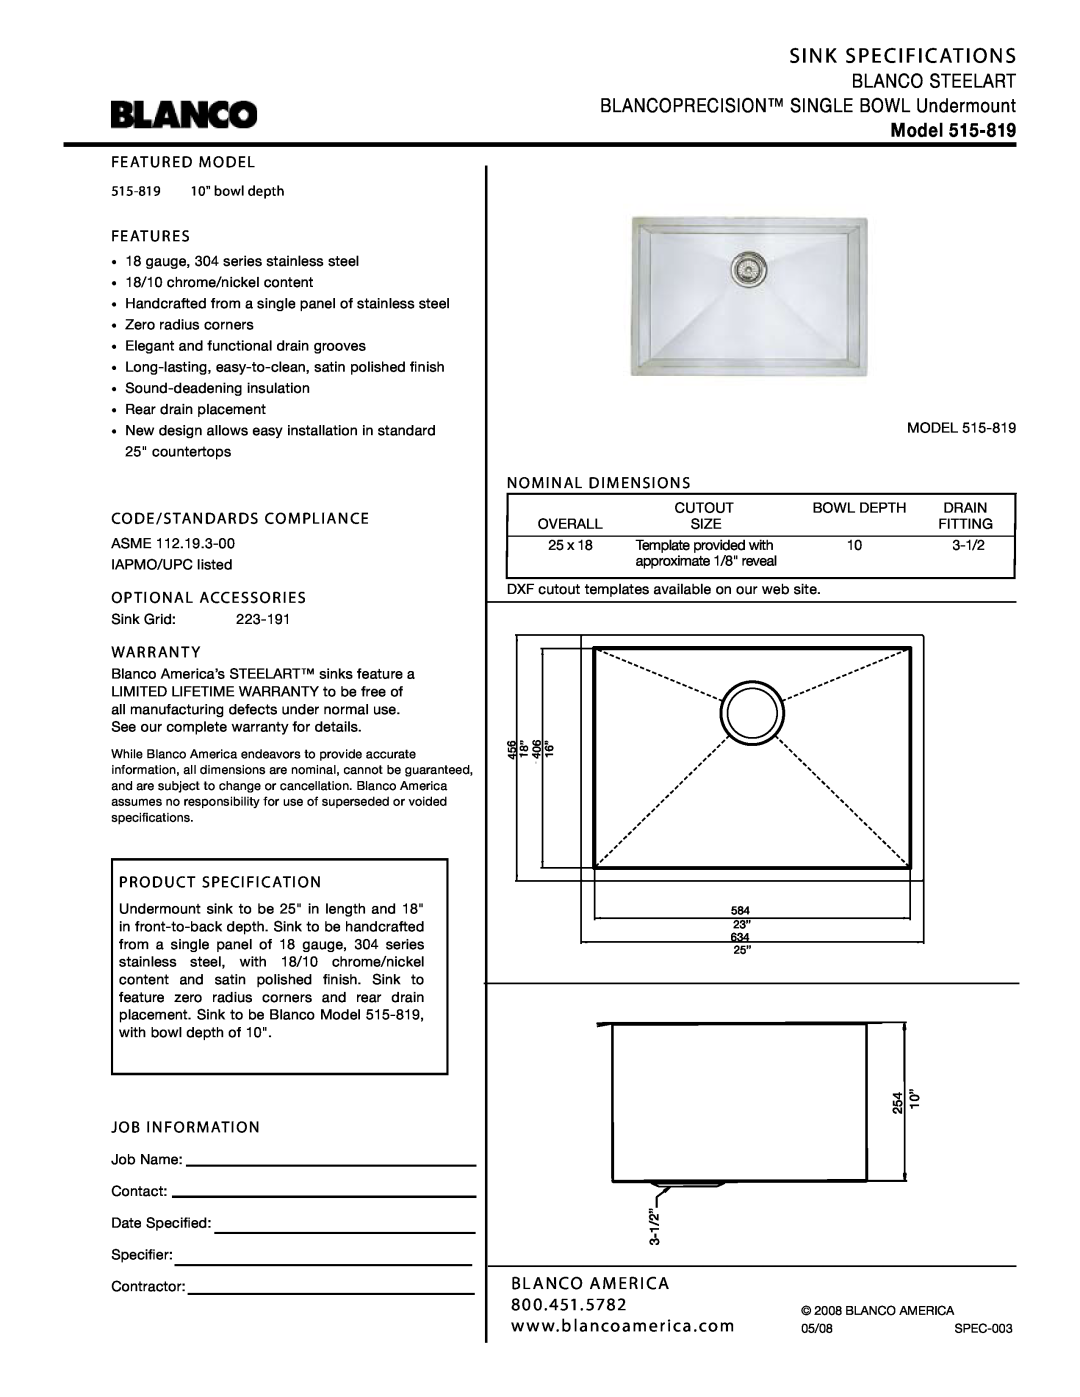 Blanco 515-819 warranty Sink Specifications, Blanco America, 800, Featured Model, Features, Code/Standards Compliance 